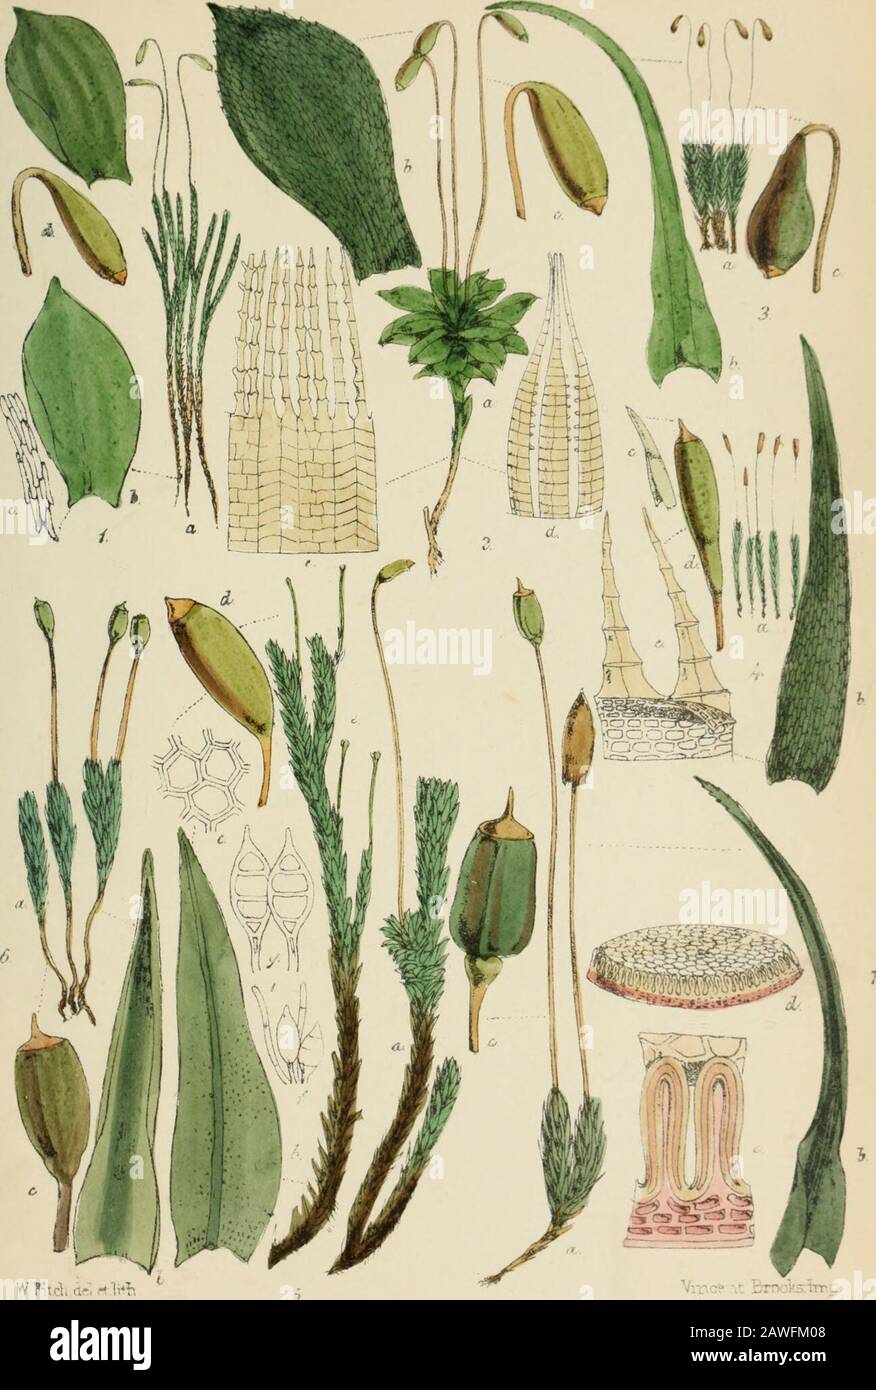 Handbook of British mosses : comprising all that are known to be natives of the British Isles . rn.p. PLATE XVIII. 1. Zieria julacea. a. plant, nat. size. b. leaf, magnified. c. leaf-cells, magnified. d. sporangium, magnified. 2. Bryiim roseum. a. plant, nat. size. b. leaf, magnified. c. sporangium, magnified. d. portion of outer peristome, magnified. e. portion of inner peristome, magnified. 3. Leptobryura pyriforrae. a. plant, nat. size. b. leaf, magnified. c. sporangium, magnified. 4. Orttodontium gracile. a. plant, nat. size. b. leaf, magnified. c. veil, magnified. d. sporangium, magnified Stock Photo